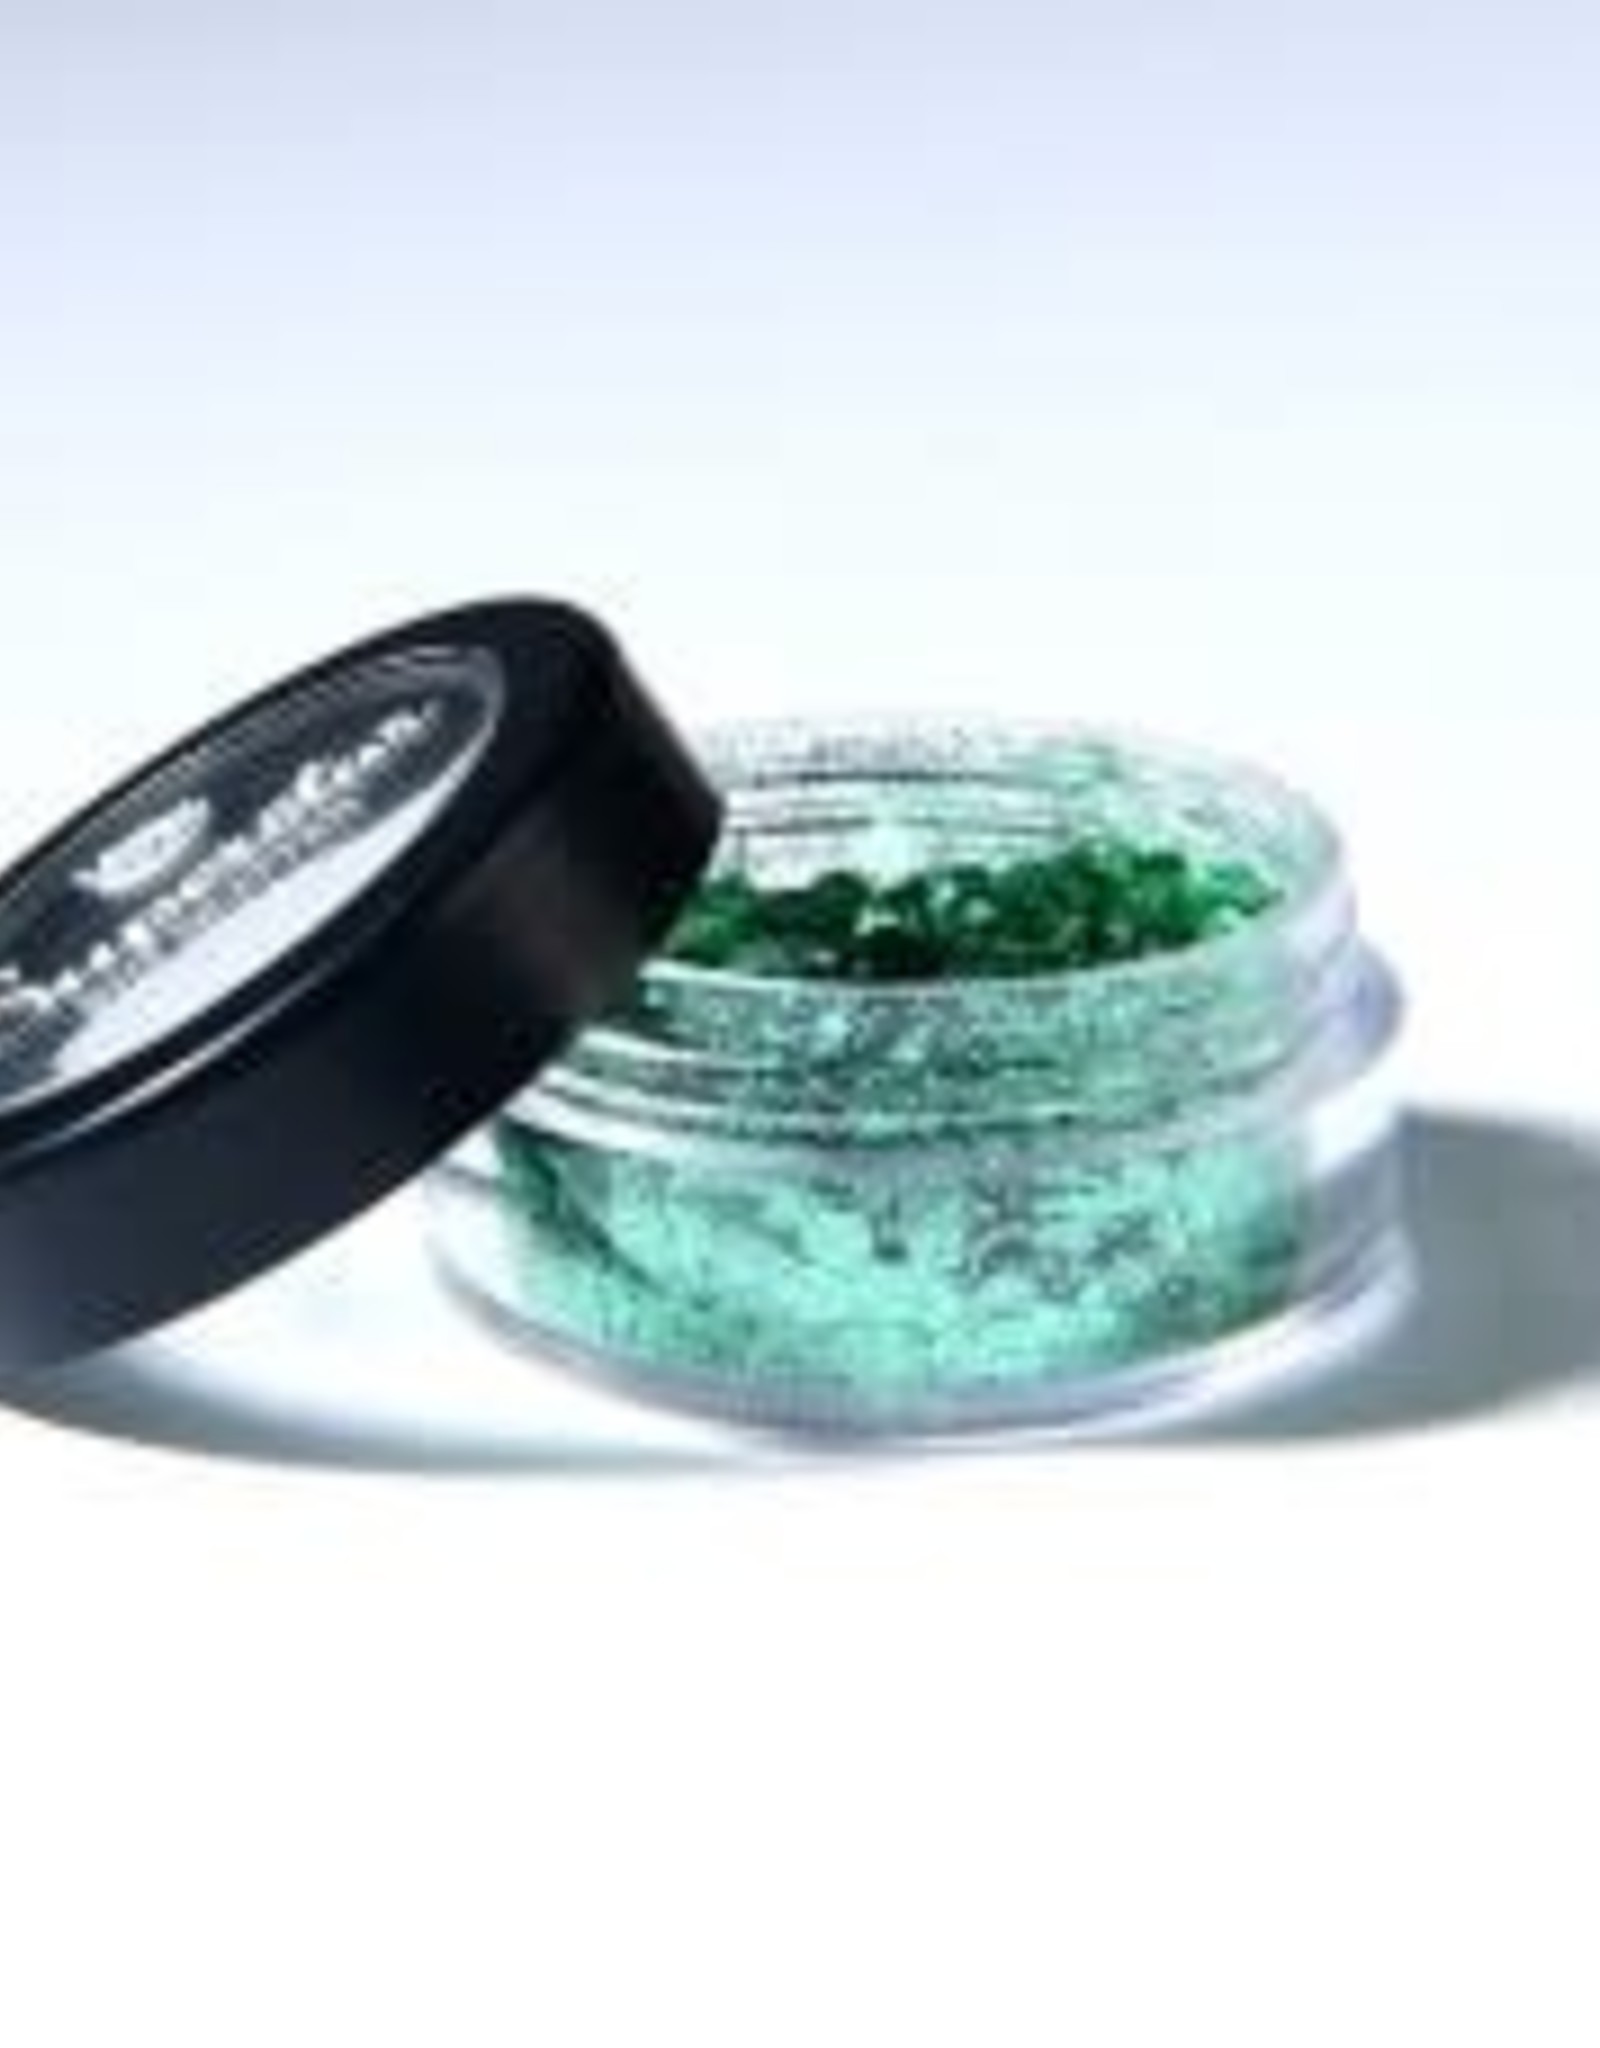 Superstar Spring Green Chunky mix Biodegradable Face- and Body Glitter